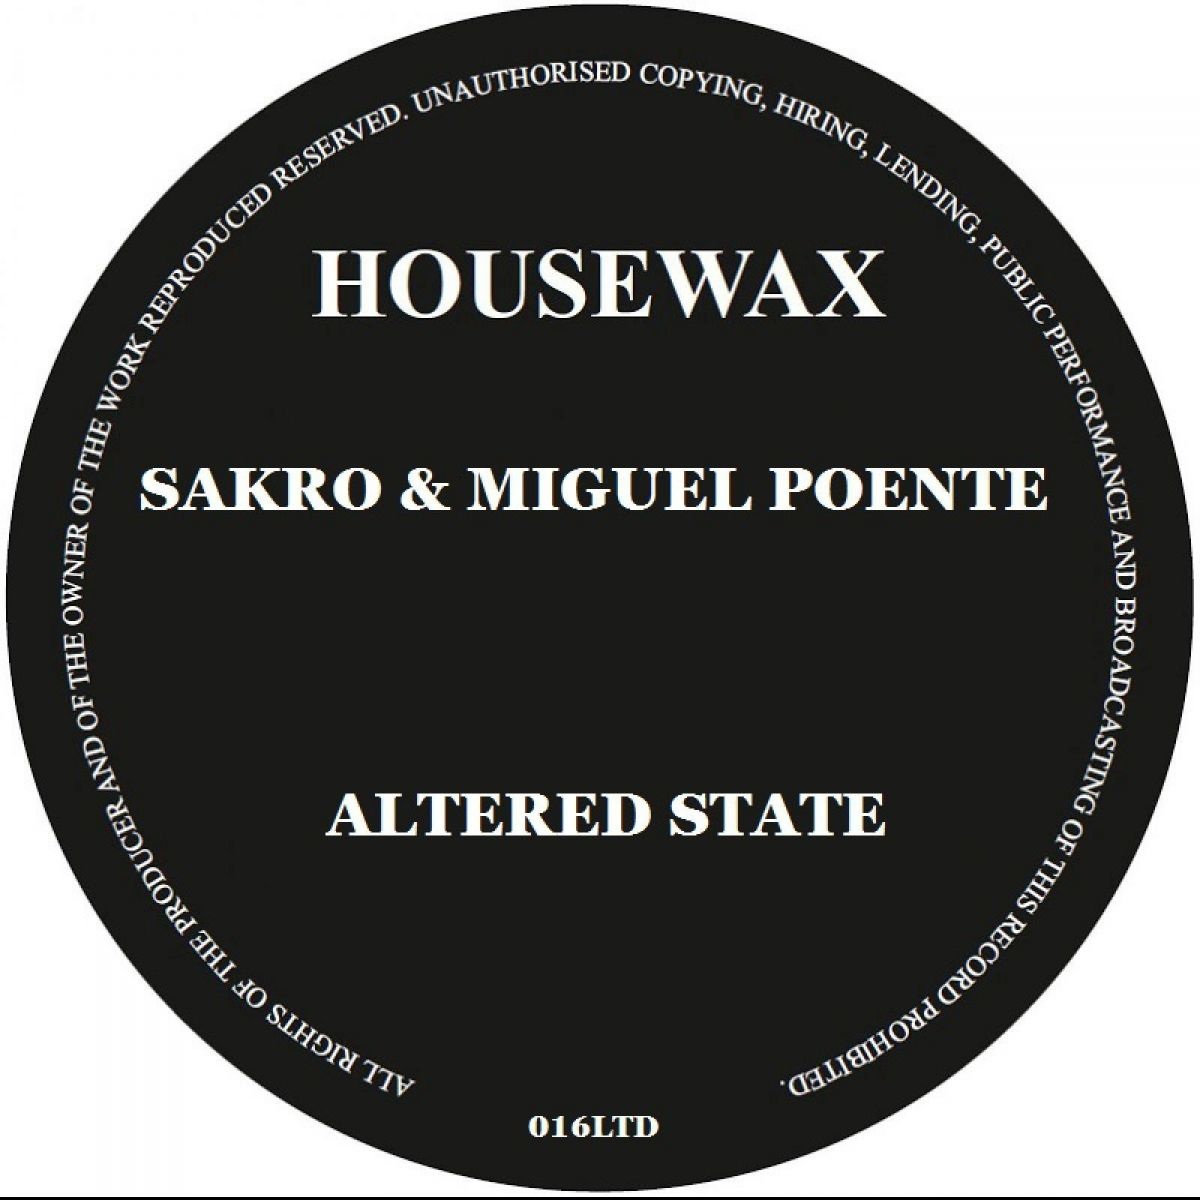 Sakro, Miguel Puente - Altered State / Housewax